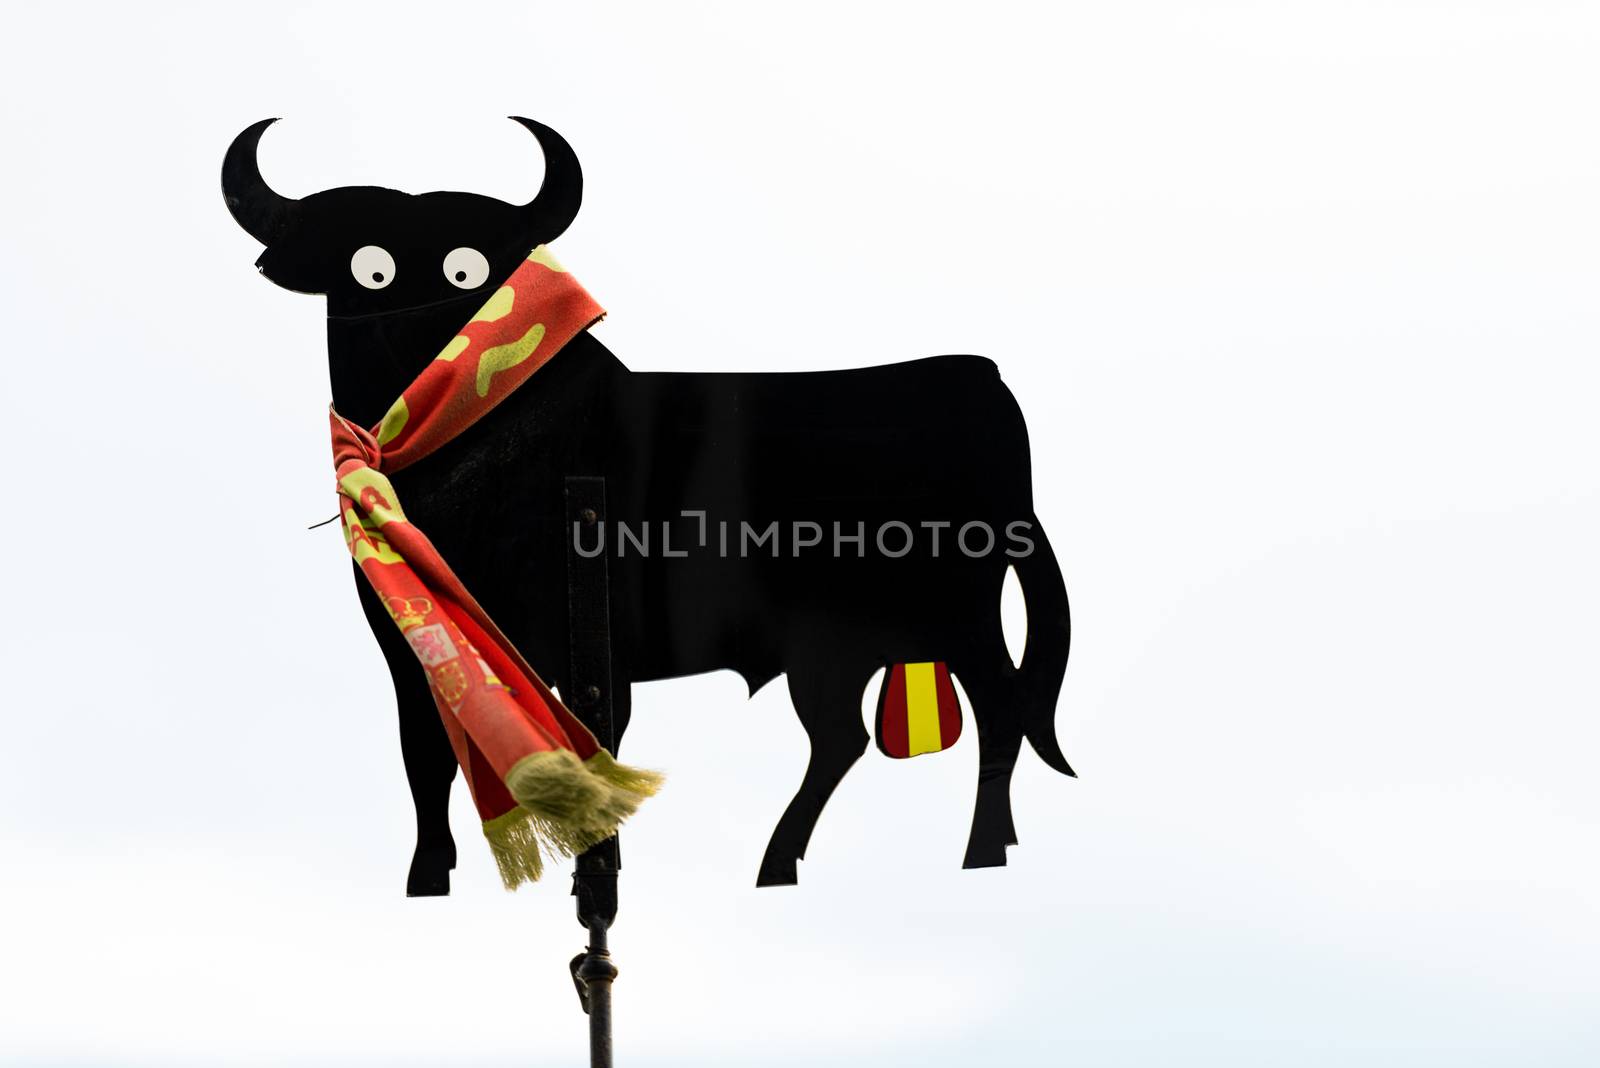 Bull is a symbol of Spain